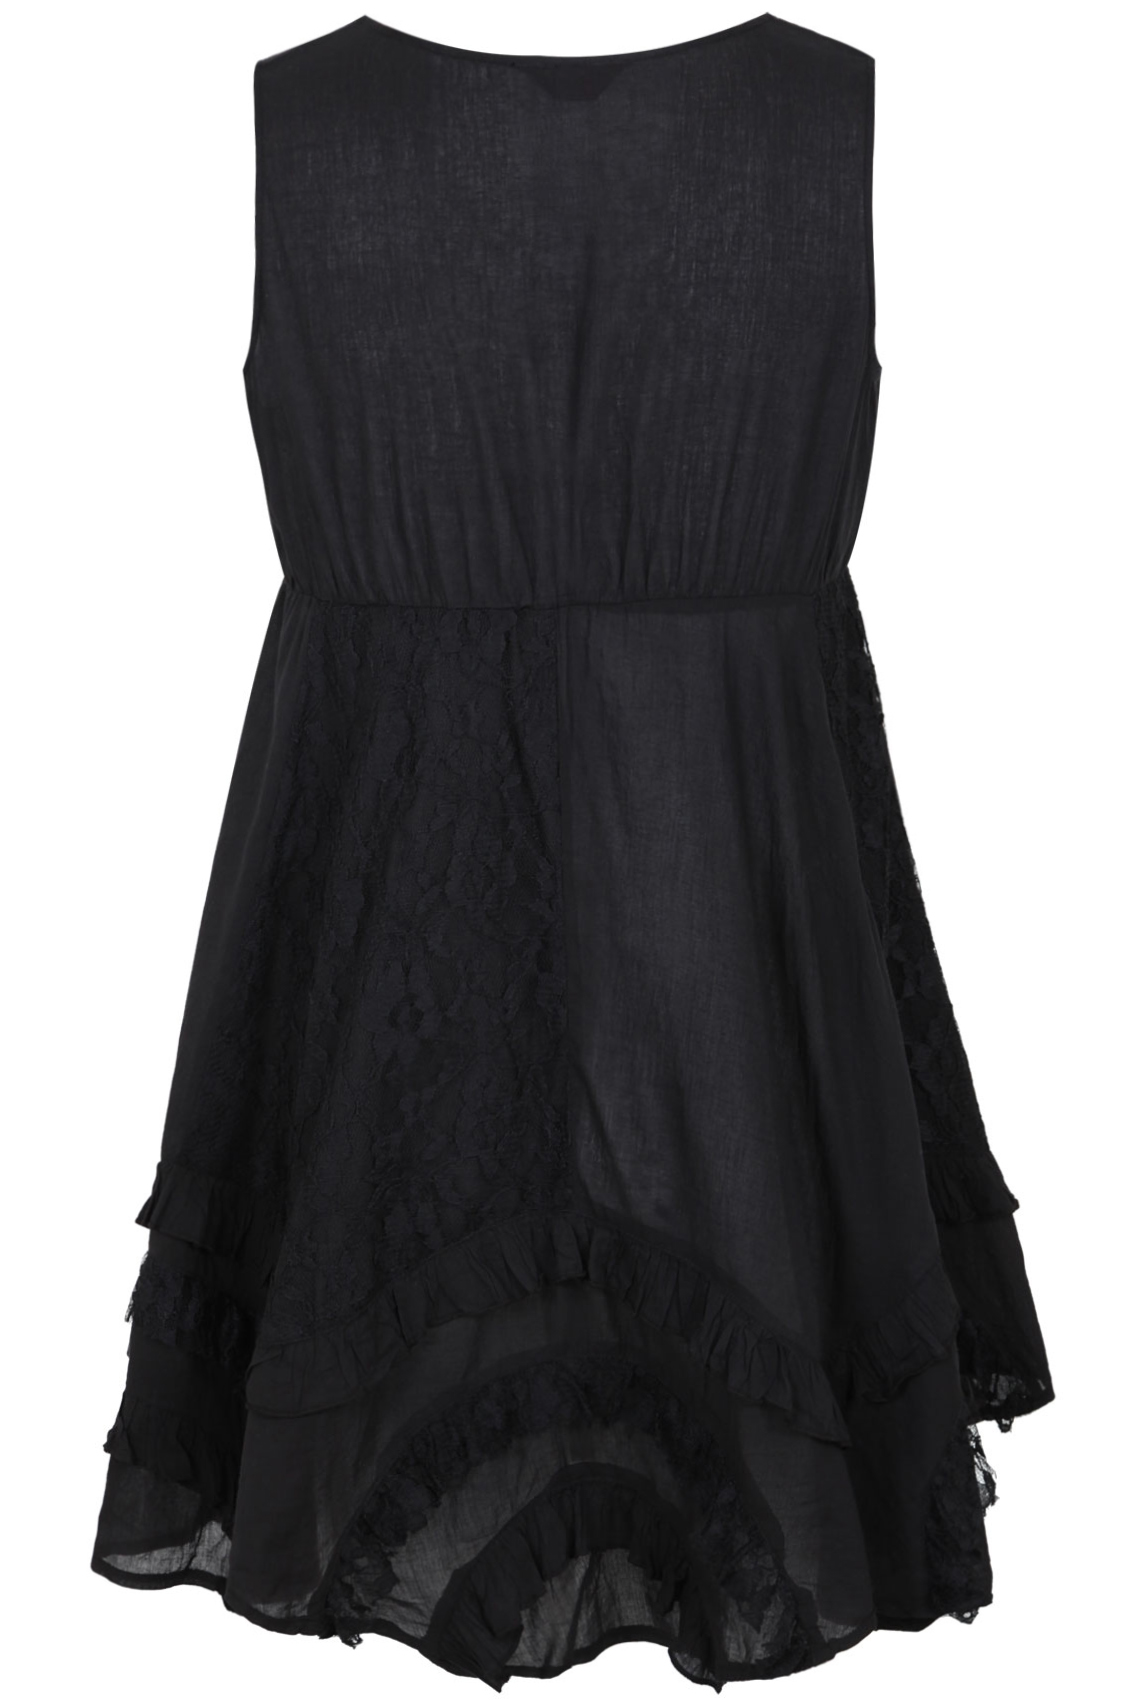 Black Sleeveless Tunic Dress With Lace Panels And Frill Trim plus size ...